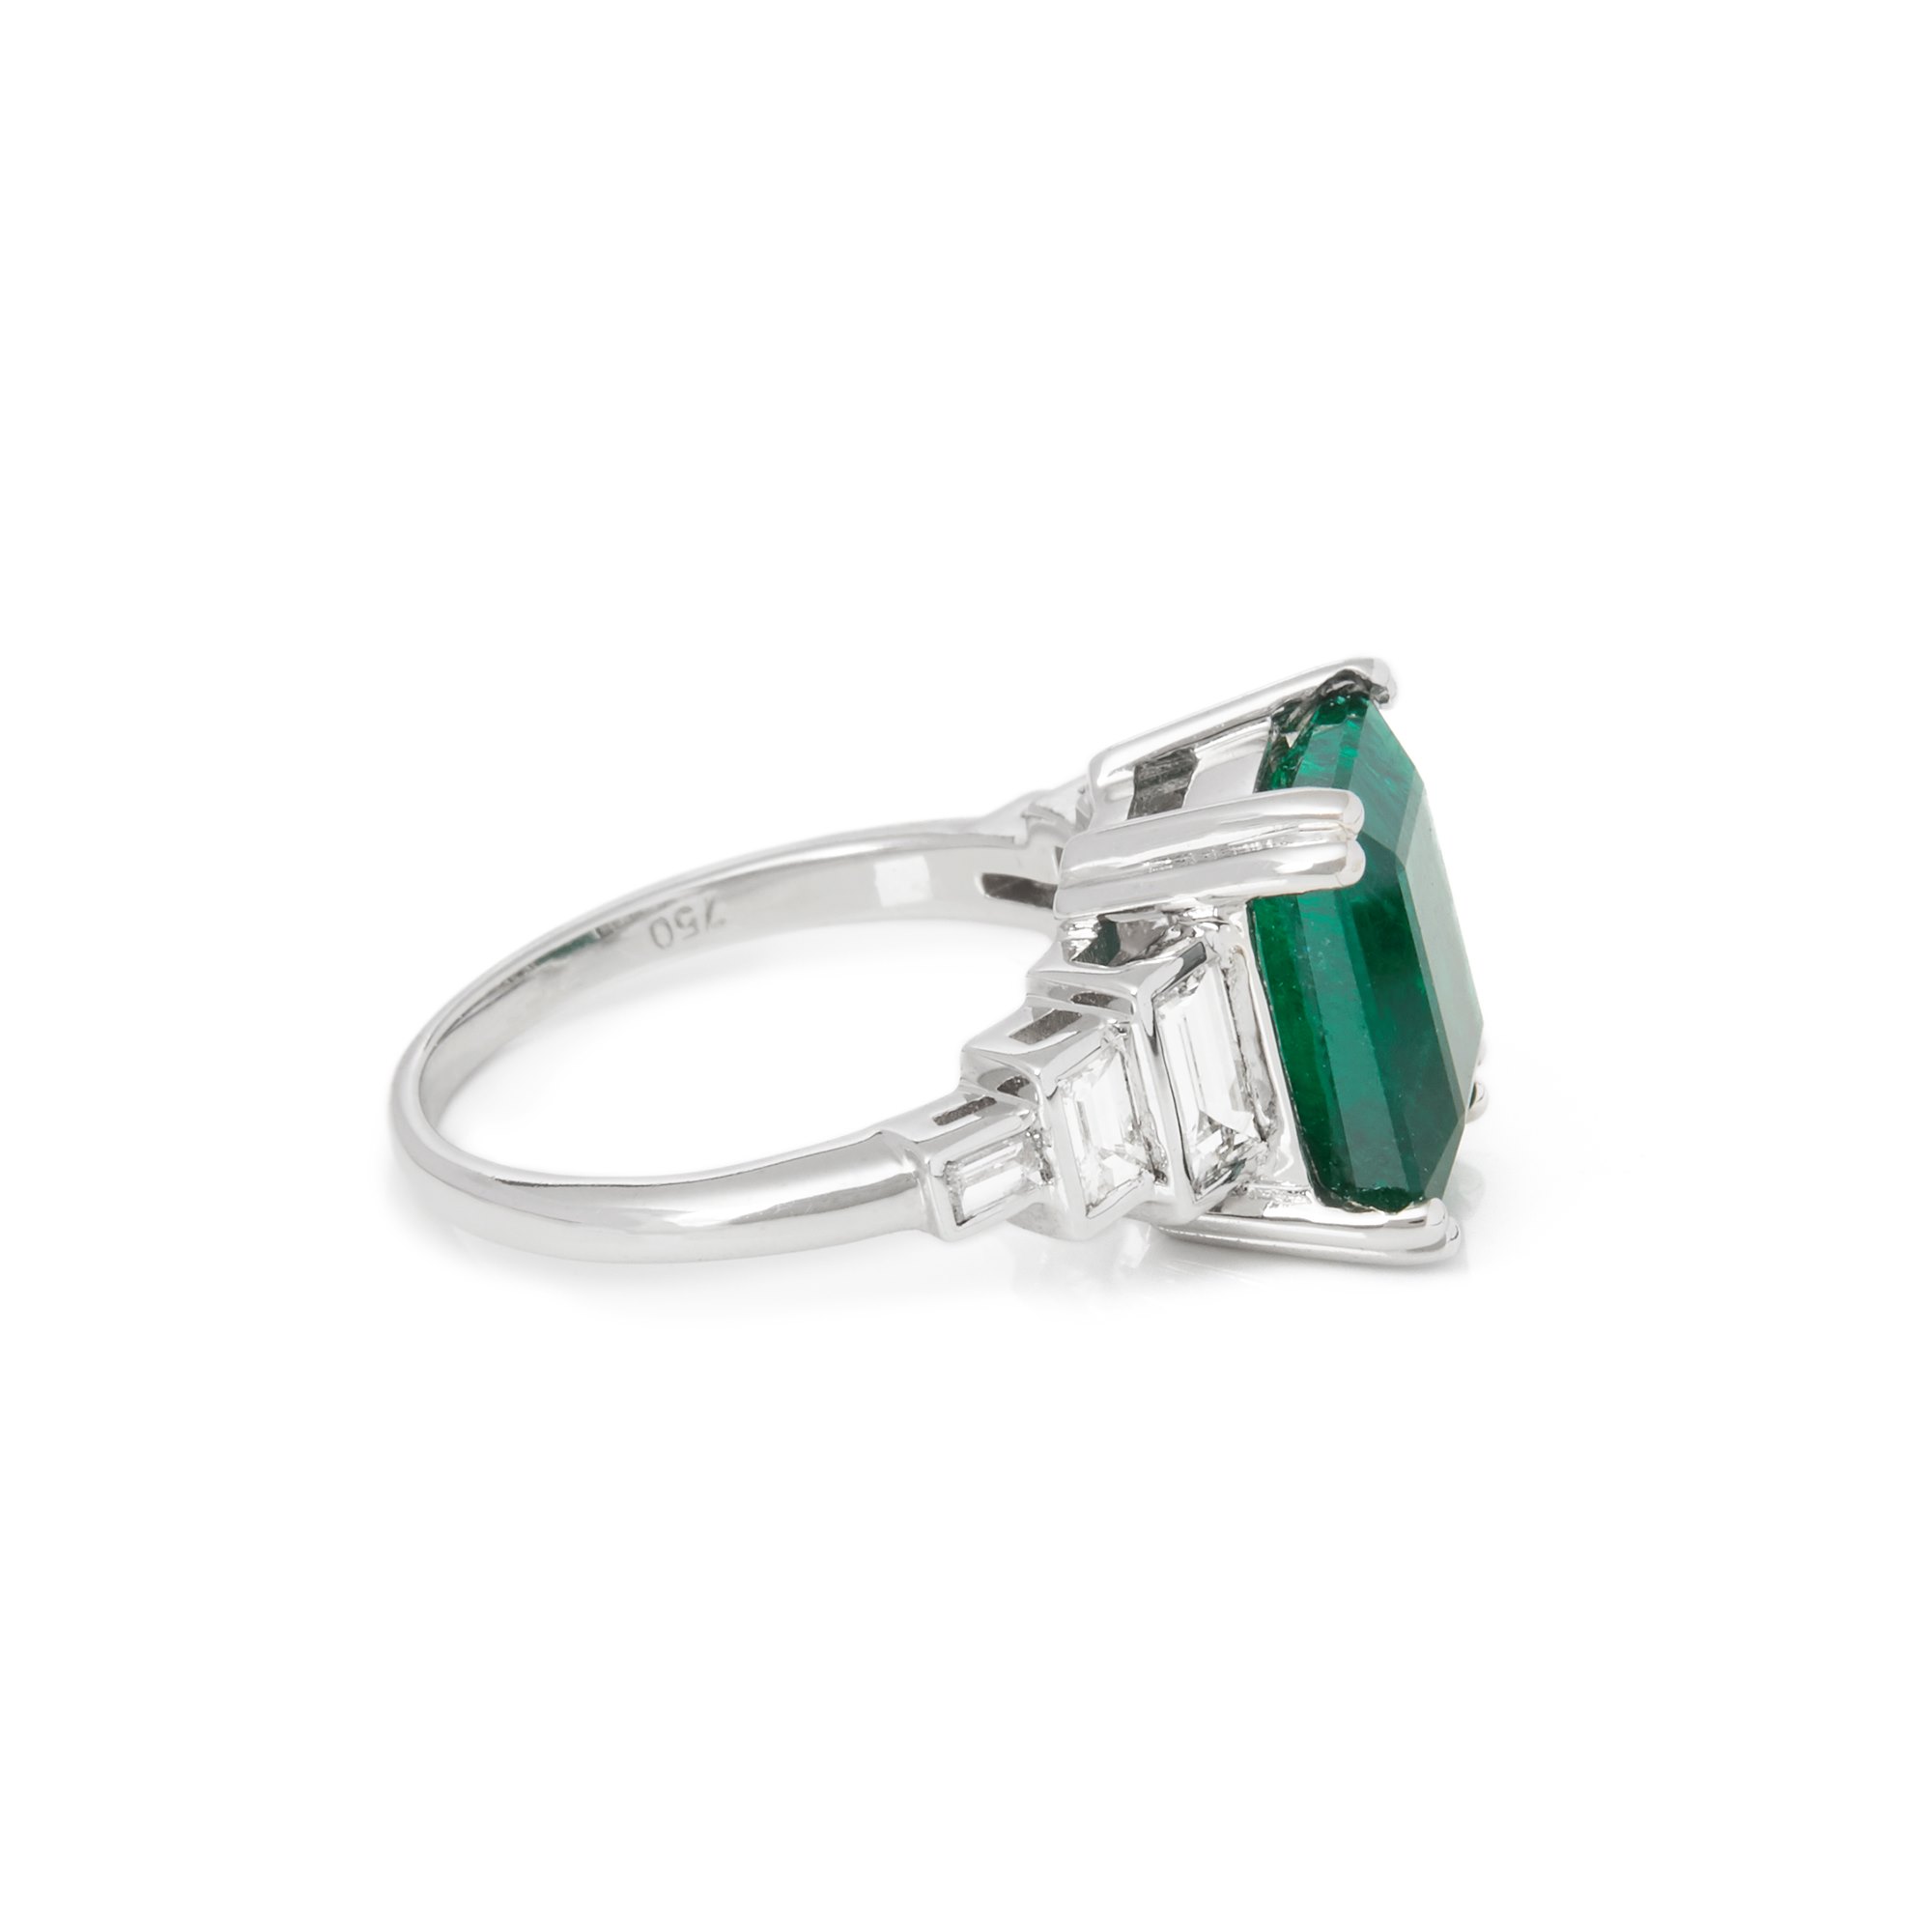 David Jerome Certified 4.8ct Untreated Colombian Emerald Cut Emerald and Diamond 18ct gold Ring